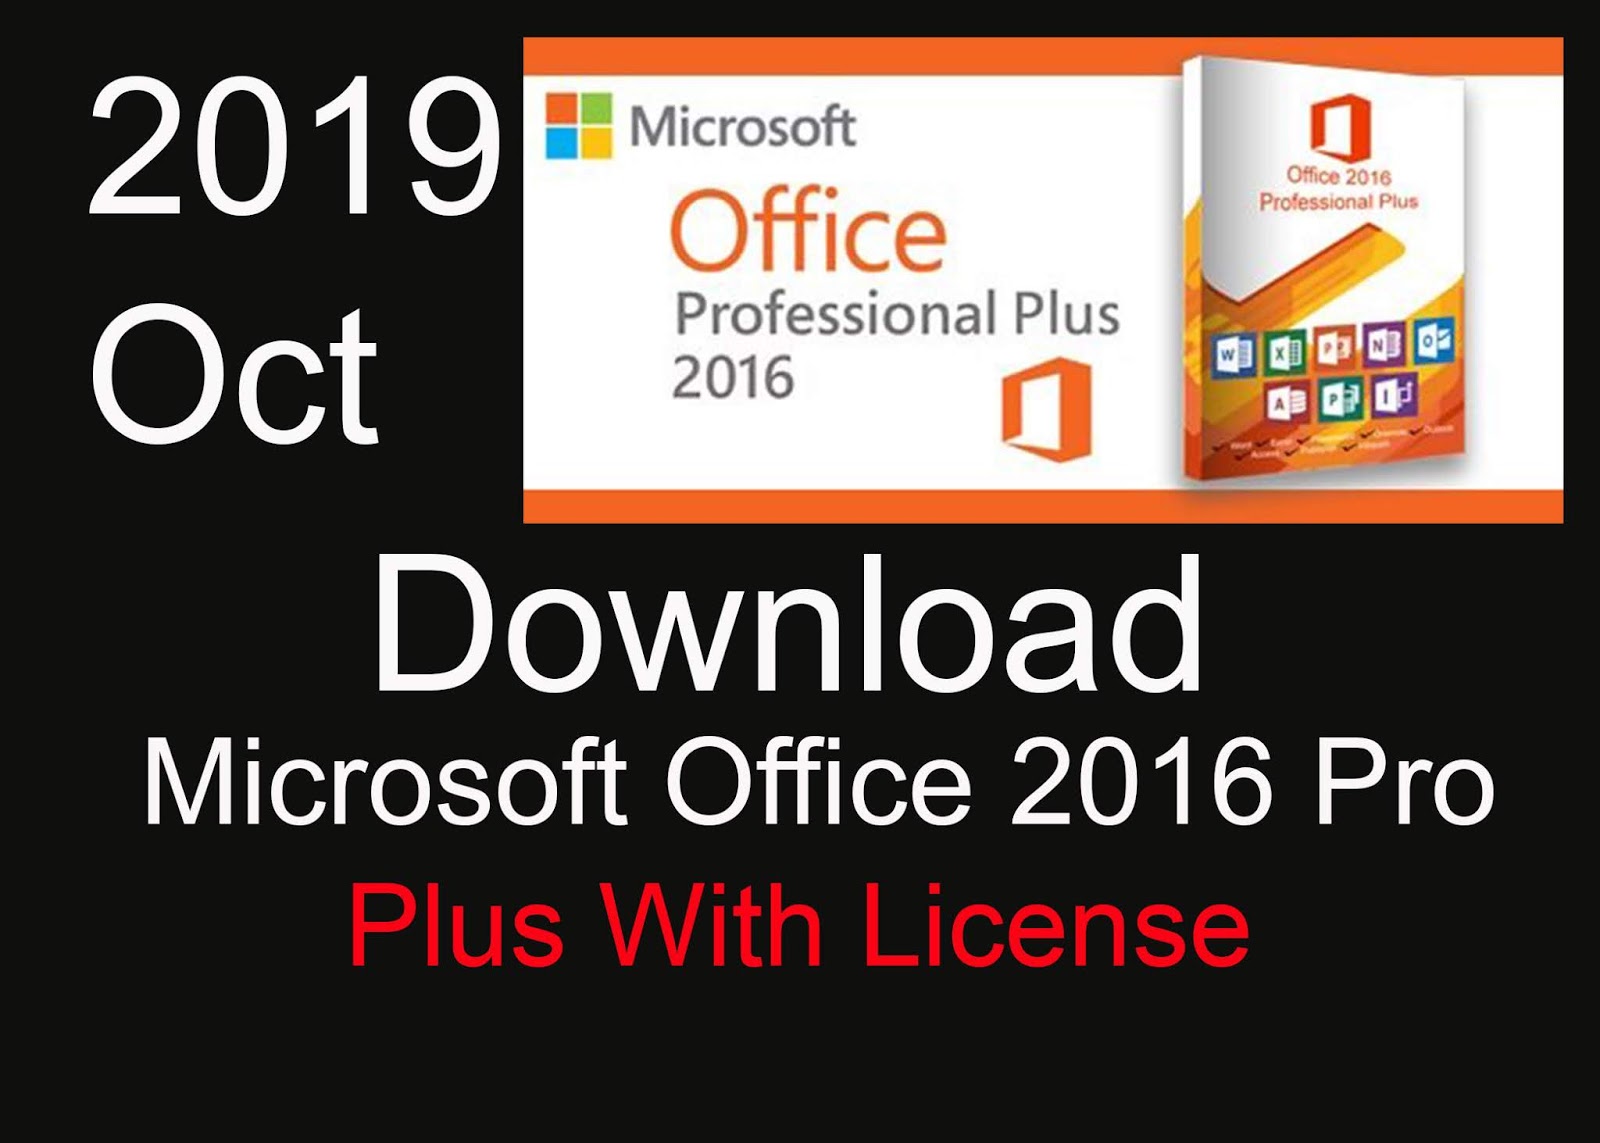 Download Microsoft Office 2016 Pro Plus With License